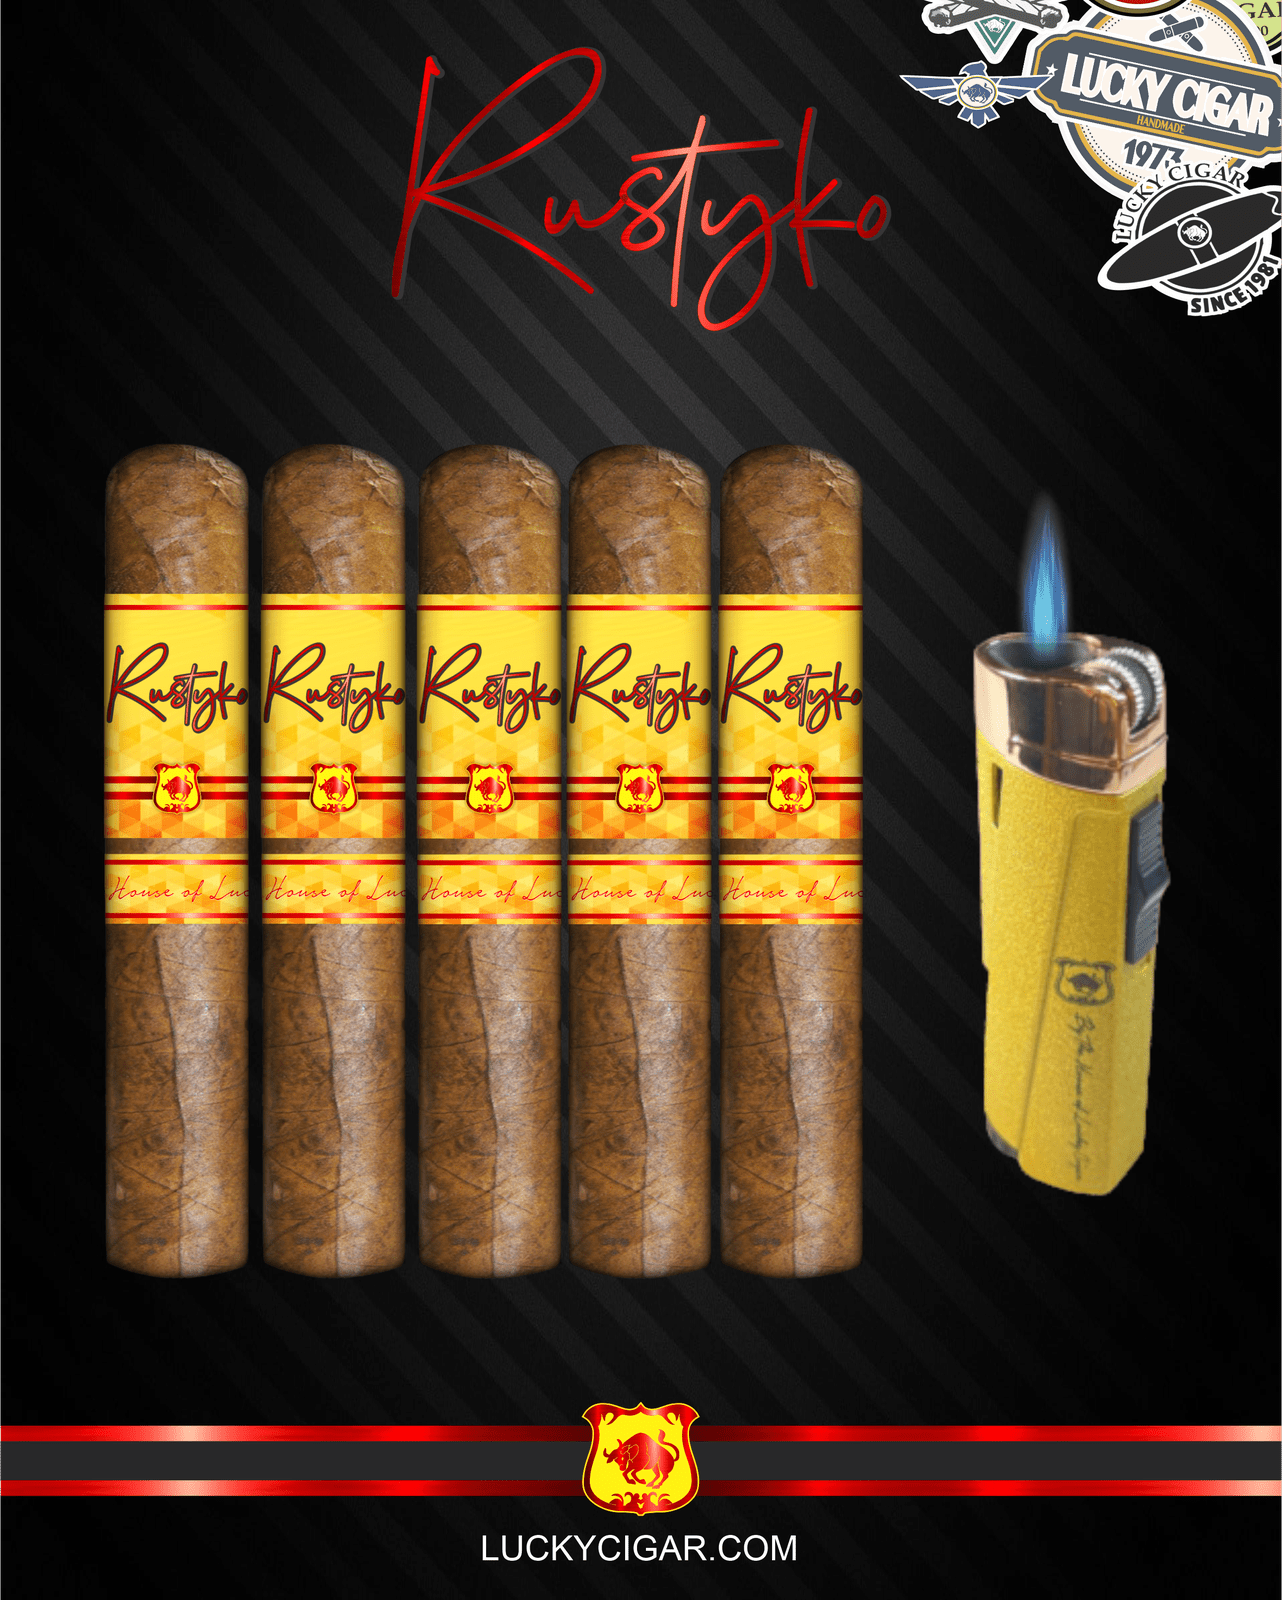 Infused Cigars: Rustyko Robusto 5x54 Cigars - Set of 5 with Yellow Torch Lighter